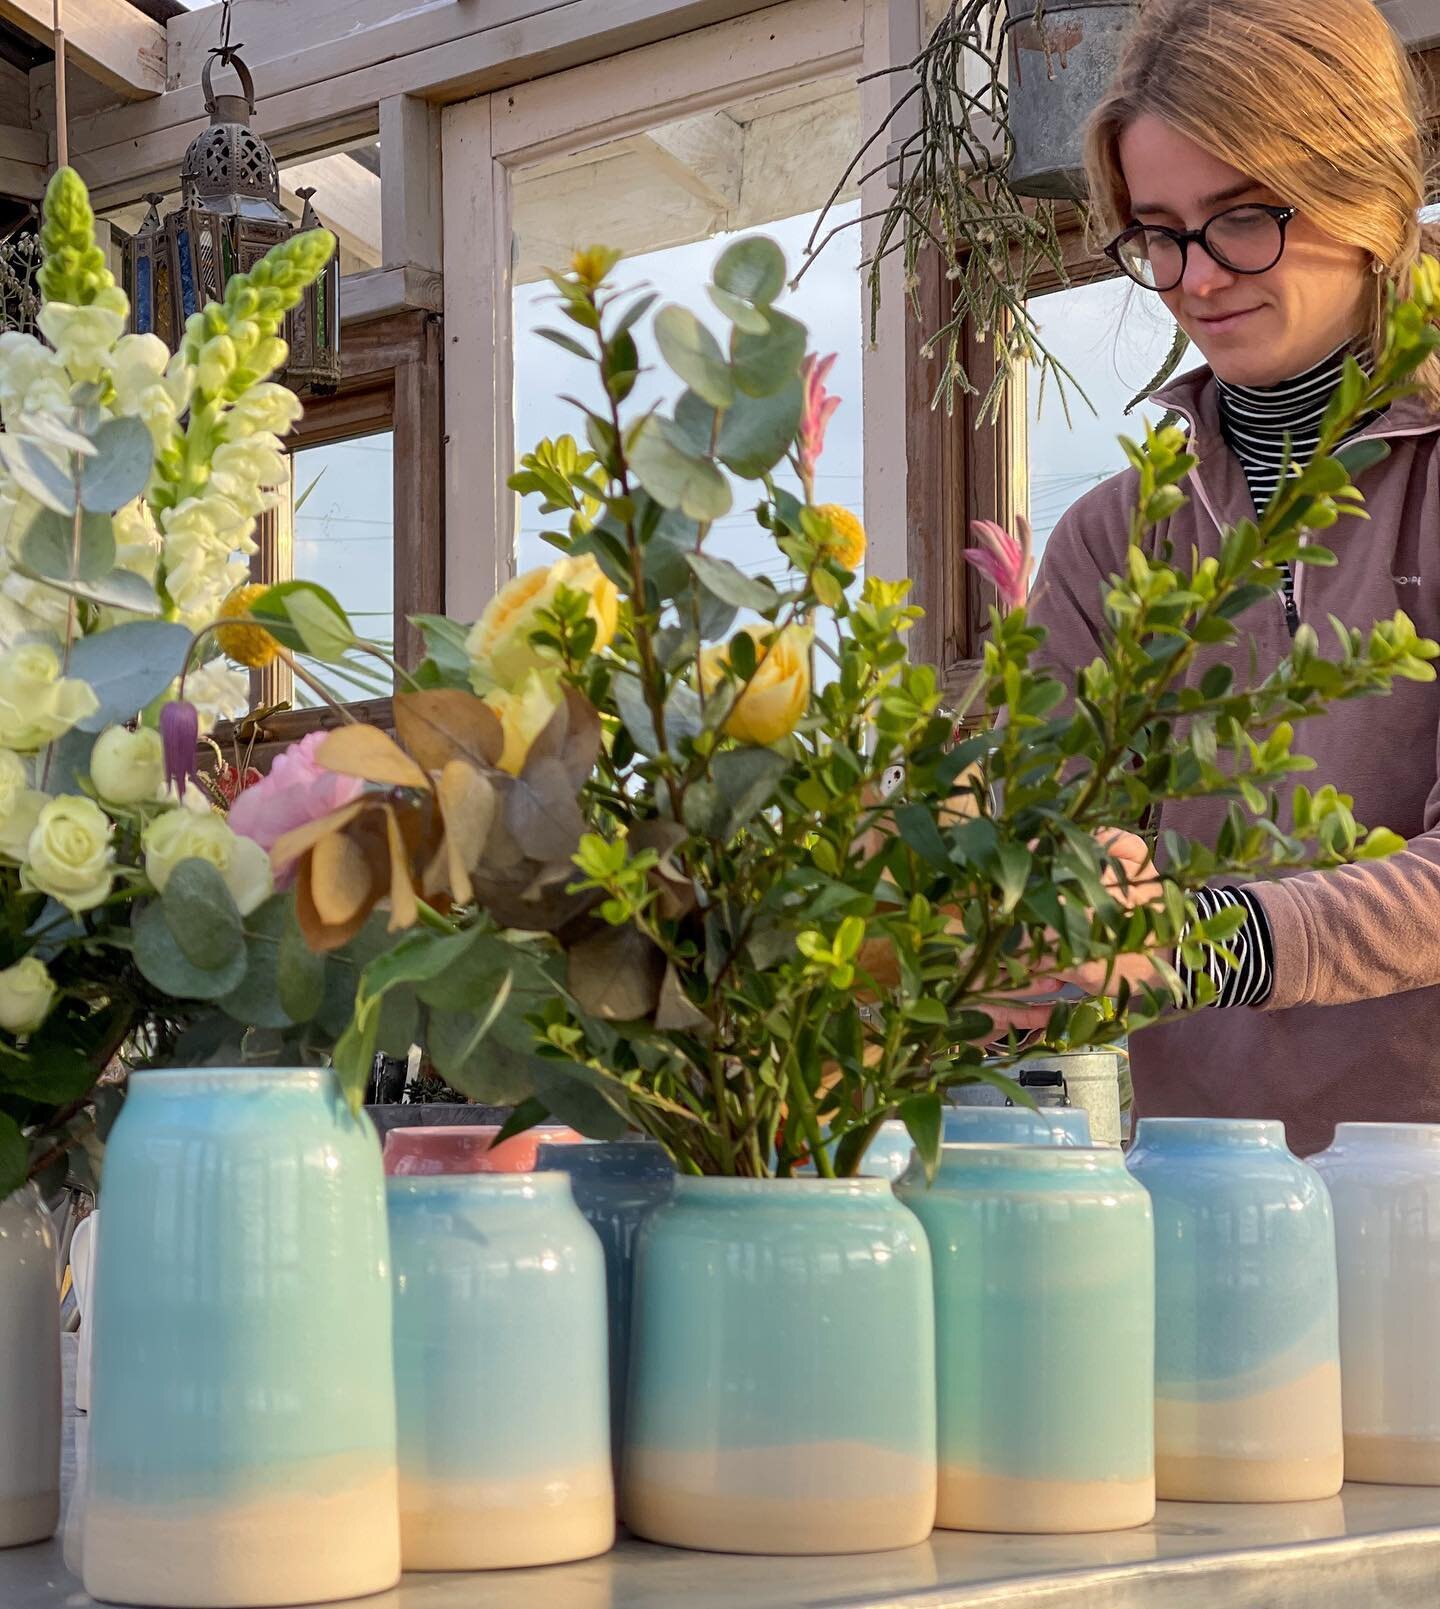 Back to making more vases this week 💙

#handmade #ceramics #constantinebay #cornwall #pottery #stoneware #wheelthrownpottery #satisifying #shoplocal #shopsmall #padstow #newquaylife #photography #ceramist #potteryforsale #potteryshop #makersgonnamak